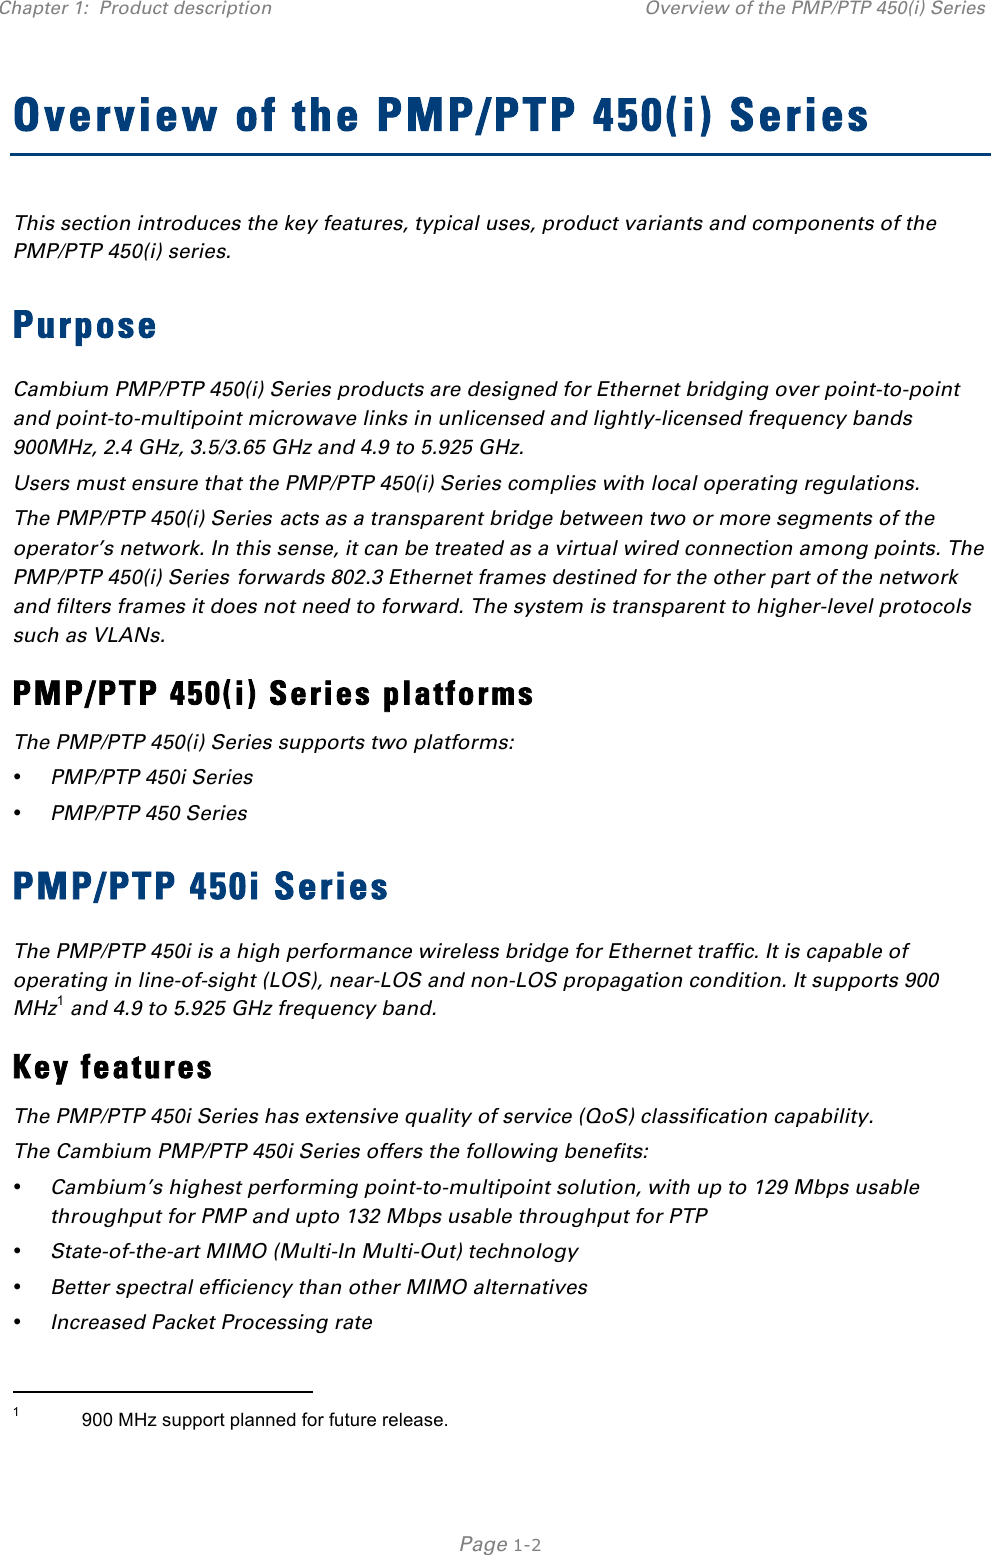 Chapter 1:  Product description Overview of the PMP/PTP 450(i) Series   Page 1-2 Overview of the PMP/PTP 450(i) Series This section introduces the key features, typical uses, product variants and components of the PMP/PTP 450(i) series. Purpose Cambium PMP/PTP 450(i) Series products are designed for Ethernet bridging over point-to-point and point-to-multipoint microwave links in unlicensed and lightly-licensed frequency bands 900MHz, 2.4 GHz, 3.5/3.65 GHz and 4.9 to 5.925 GHz. Users must ensure that the PMP/PTP 450(i) Series complies with local operating regulations. The PMP/PTP 450(i) Series acts as a transparent bridge between two or more segments of the operator’s network. In this sense, it can be treated as a virtual wired connection among points. The PMP/PTP 450(i) Series forwards 802.3 Ethernet frames destined for the other part of the network and filters frames it does not need to forward. The system is transparent to higher-level protocols such as VLANs. PMP/PTP 450(i) Series platforms The PMP/PTP 450(i) Series supports two platforms: • PMP/PTP 450i Series  • PMP/PTP 450 Series PMP/PTP 450i Series The PMP/PTP 450i is a high performance wireless bridge for Ethernet traffic. It is capable of operating in line-of-sight (LOS), near-LOS and non-LOS propagation condition. It supports 900 MHz1 and 4.9 to 5.925 GHz frequency band. Key features The PMP/PTP 450i Series has extensive quality of service (QoS) classification capability.  The Cambium PMP/PTP 450i Series offers the following benefits: • Cambium’s highest performing point-to-multipoint solution, with up to 129 Mbps usable throughput for PMP and upto 132 Mbps usable throughput for PTP • State-of-the-art MIMO (Multi-In Multi-Out) technology • Better spectral efficiency than other MIMO alternatives • Increased Packet Processing rate                                                 1            900 MHz support planned for future release. 